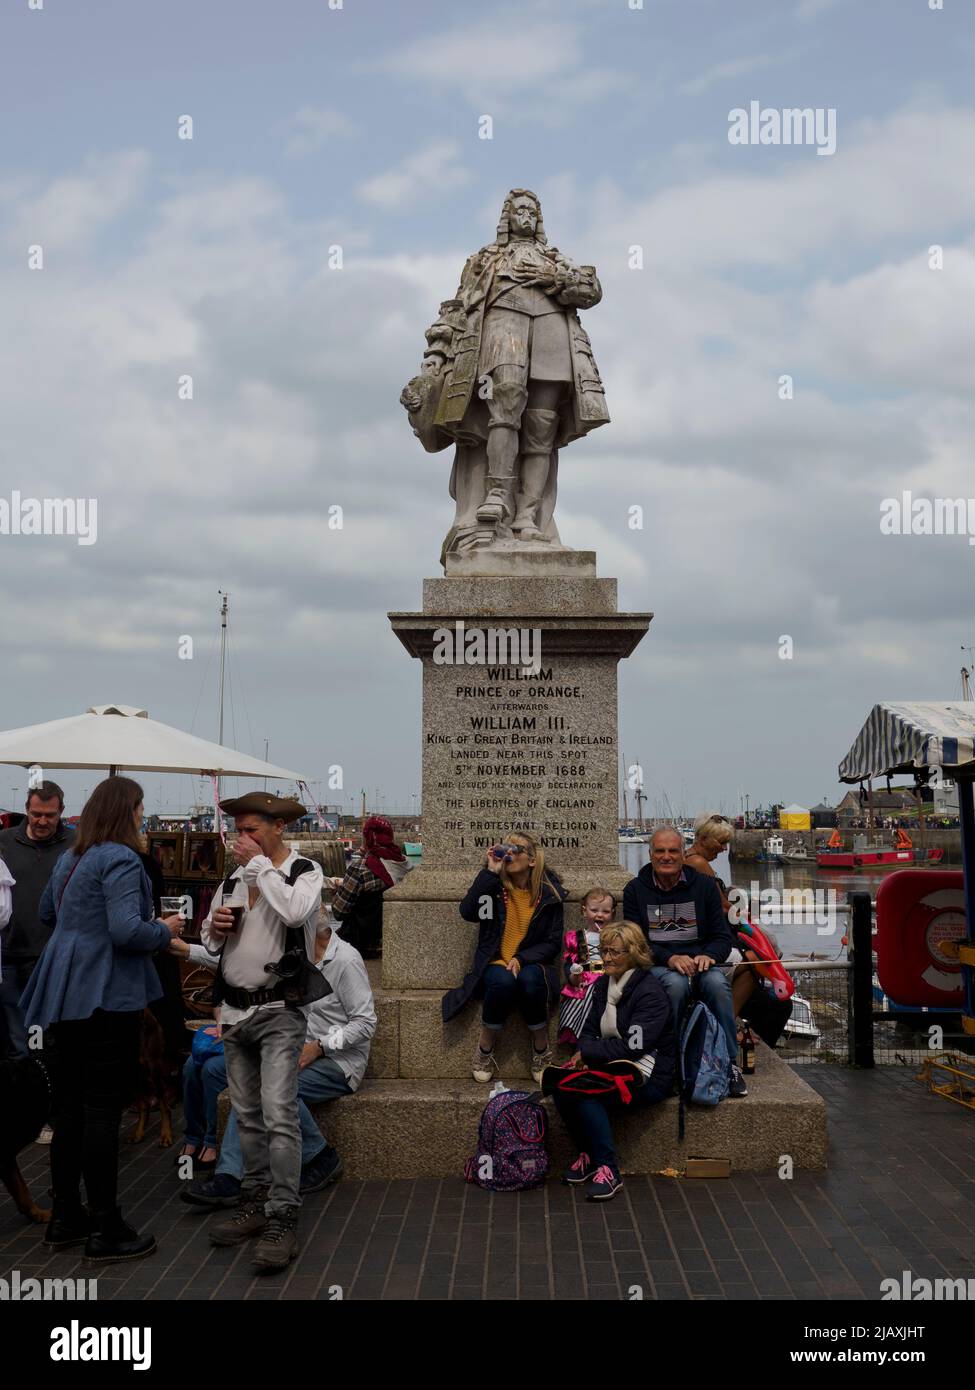 The statue on the Quay of Prince William of Orange, who landed in Brixham in the November of 1688 during the Glorious Revolution. His successful invas Stock Photo